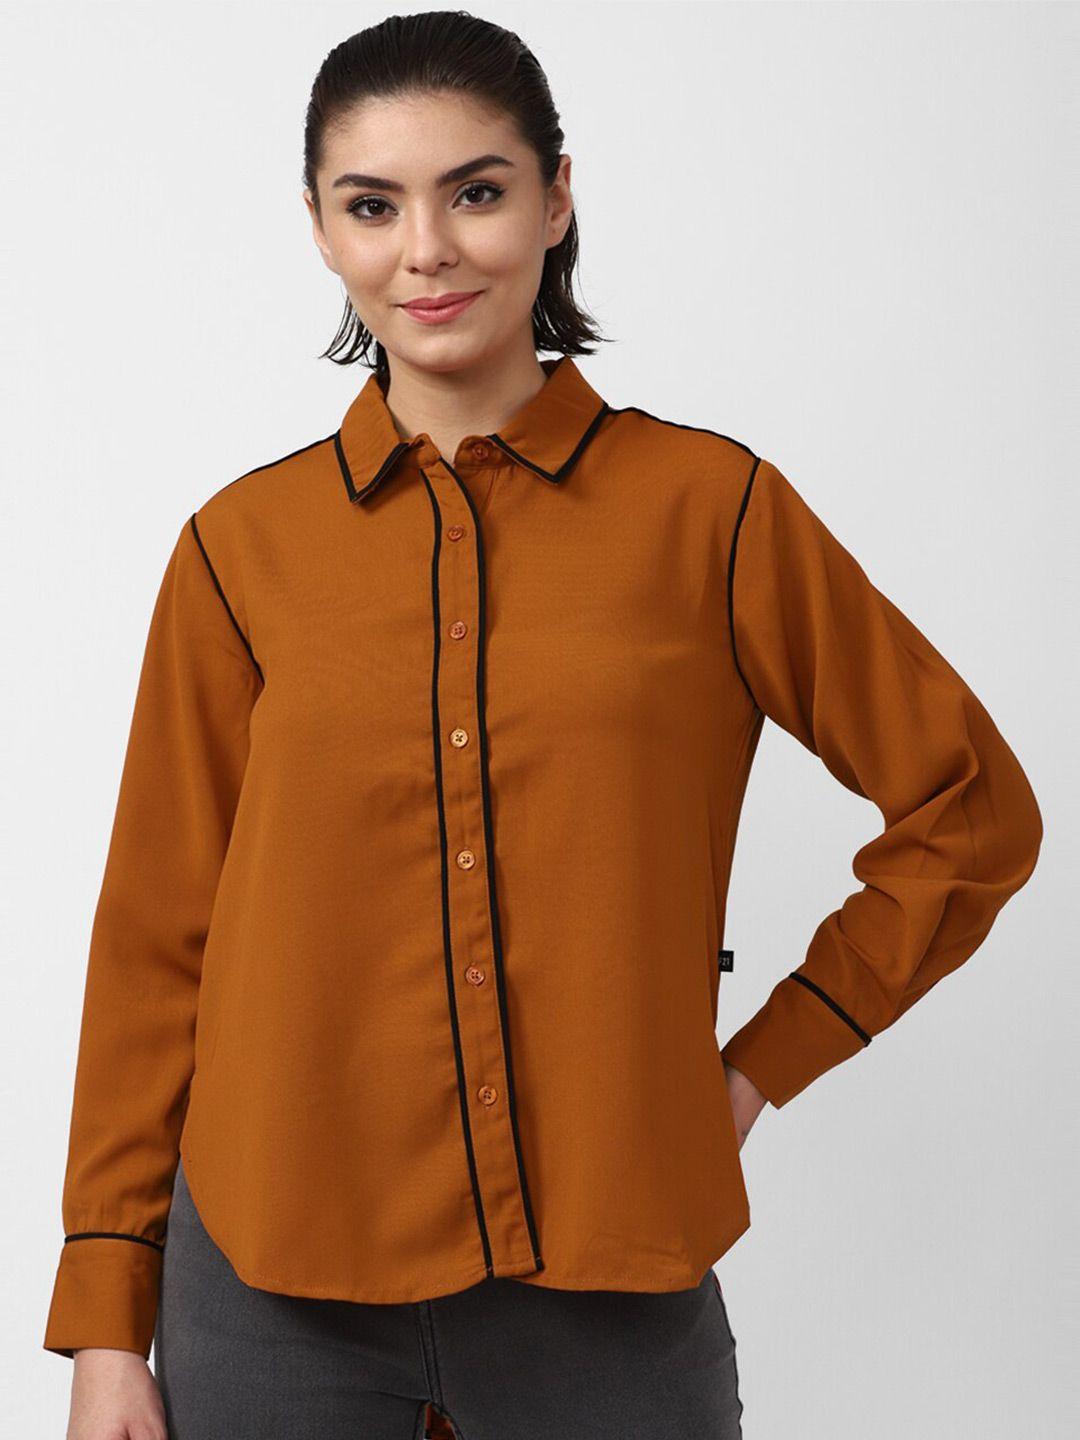 forever-21-women-brown-solid-casual-shirt